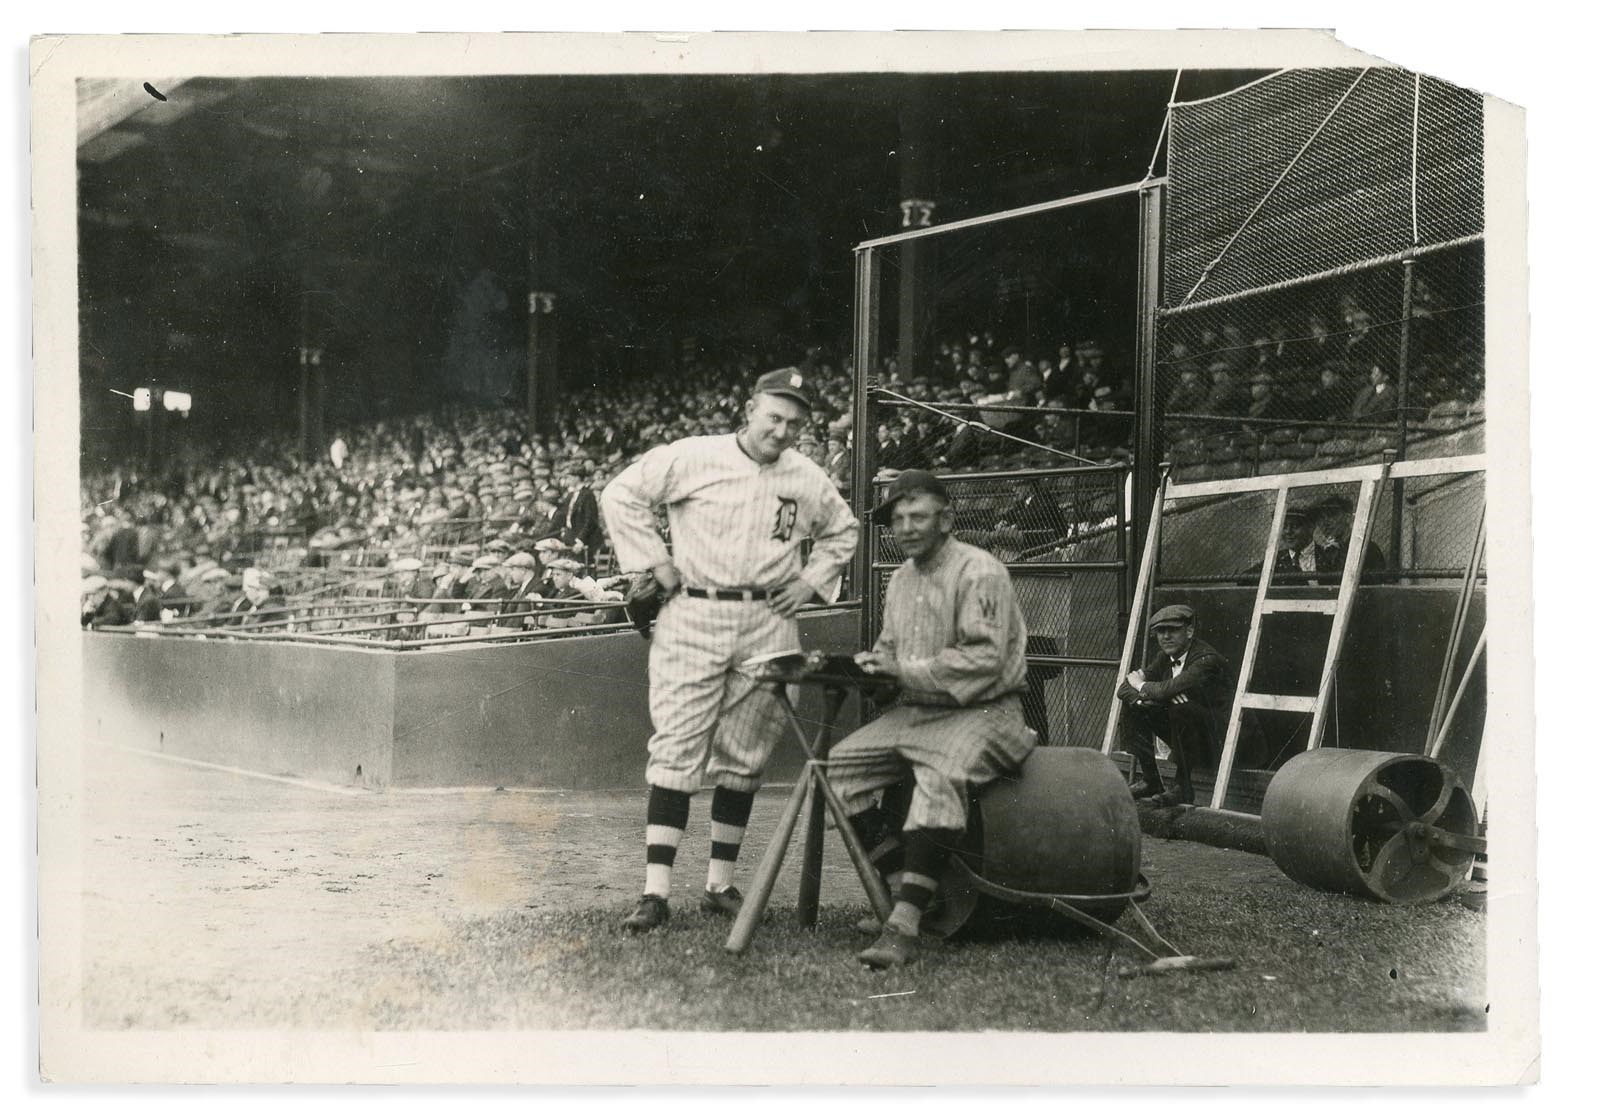 Vintage Sports Photographs - 1920's Ty Cobb and Nick Altrock Type 1 Photo